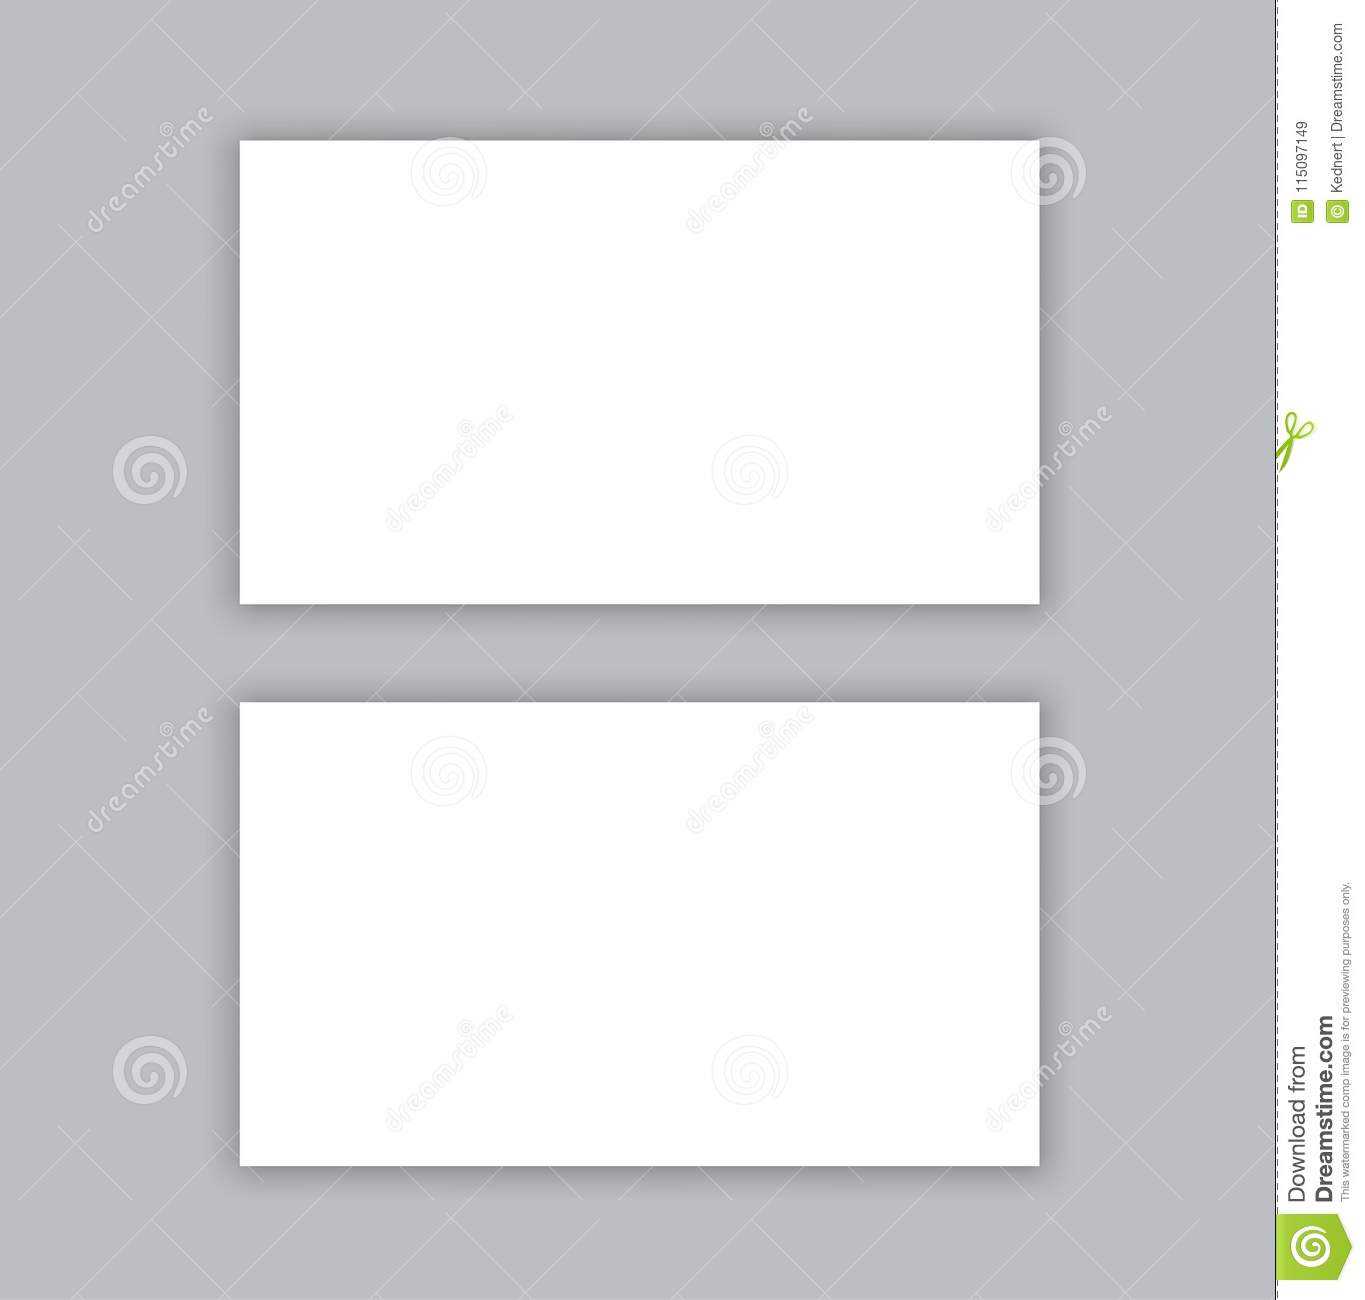 Blank Business Card With Shadow Mockup Cover Template. Stock Inside Plain Business Card Template